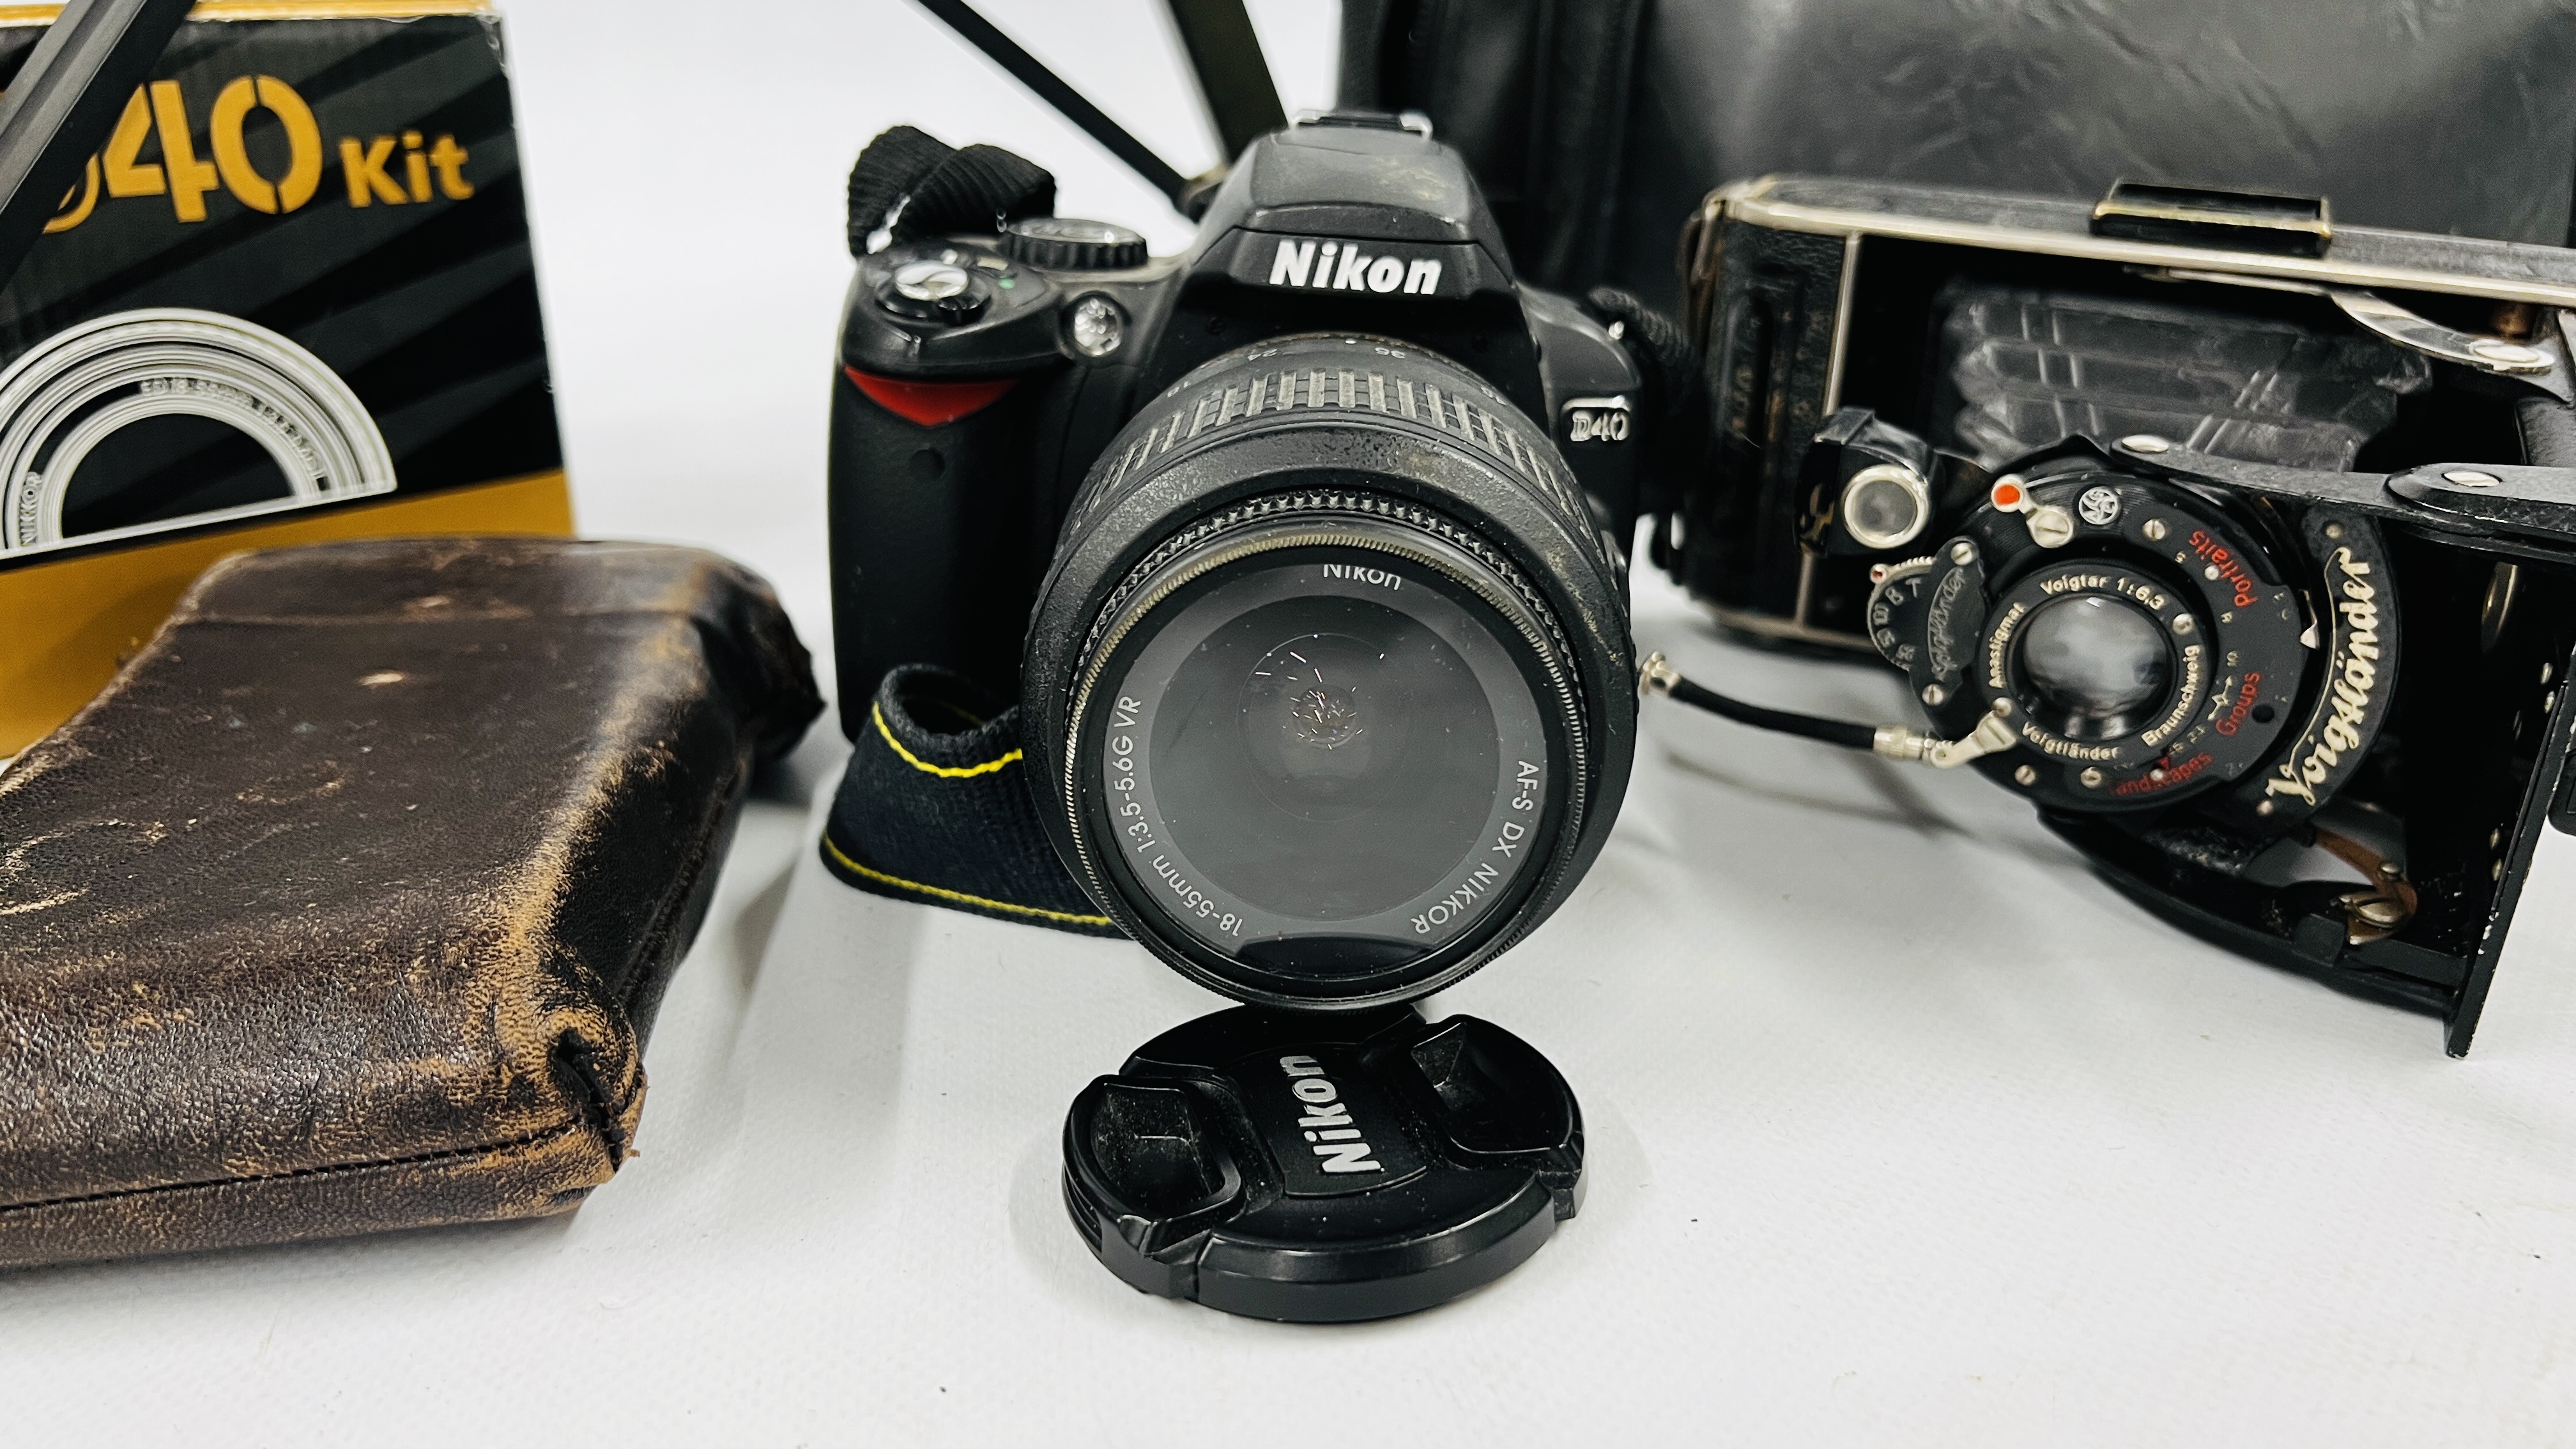 A NIKON D40 DSLR CAMERA BODY FITTED WITH NIKON DX 18-55MM LENS COMPLETE WITH BOX AND ACCESSORIES + - Image 2 of 6